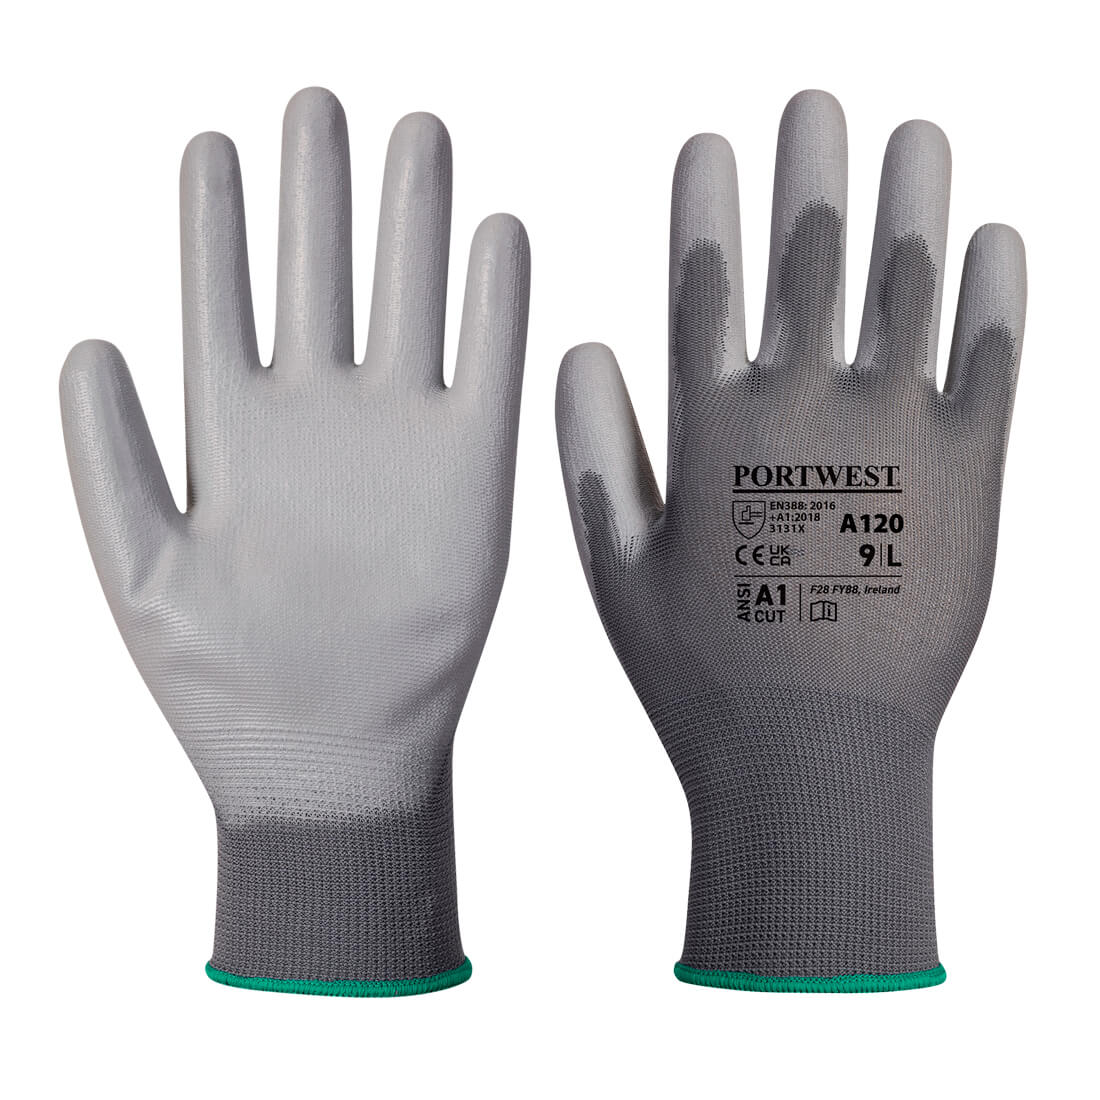 A120 Portwest® PU Coated A1 Grippy Work Gloves - Gray